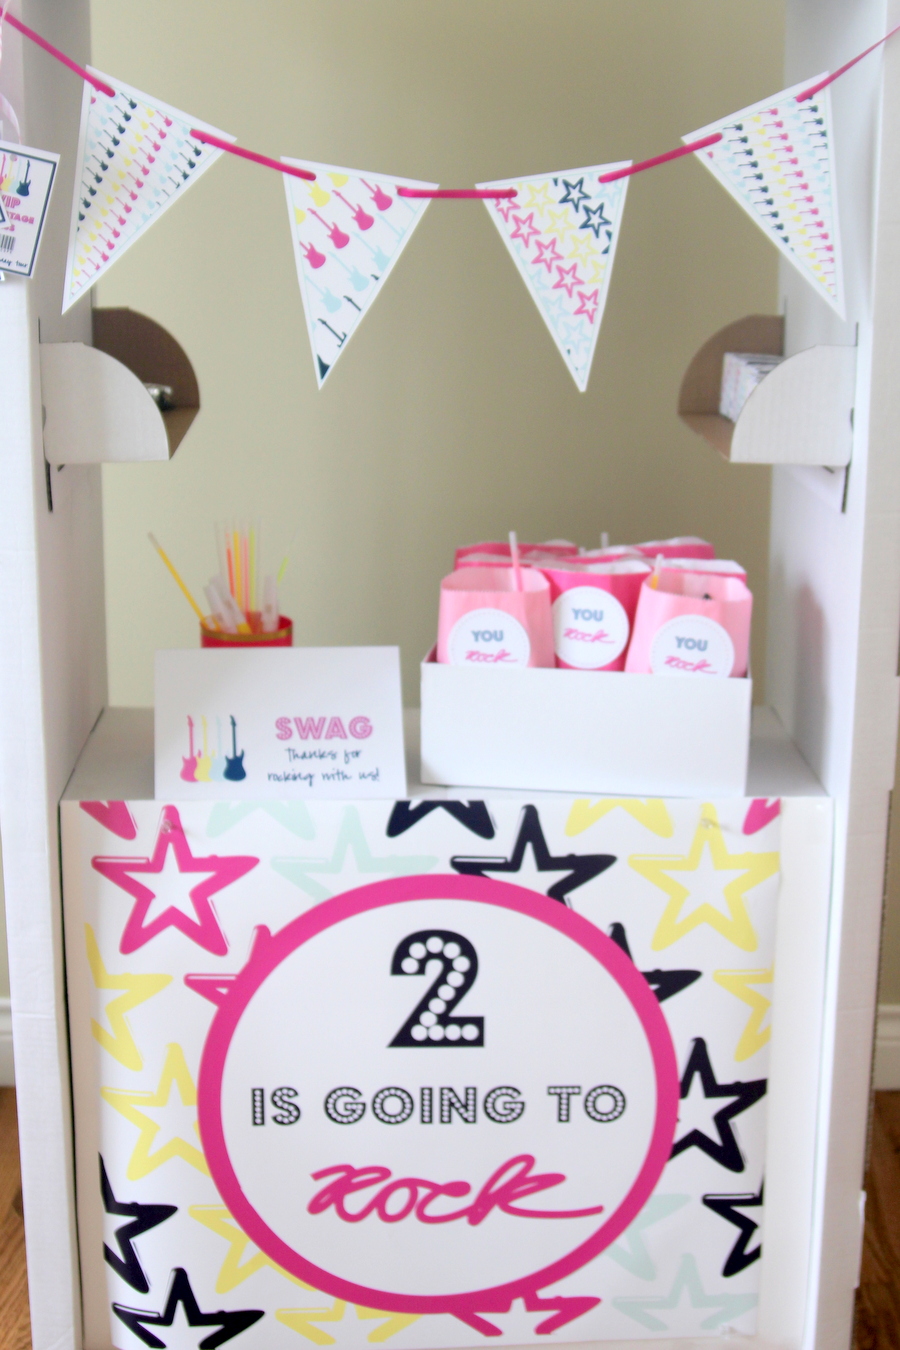 Time to party like a rock star! This sweet rock star birthday party includes all sorts of party ideas- like this cute swag booth made from a $15 IKEA cardboard market!